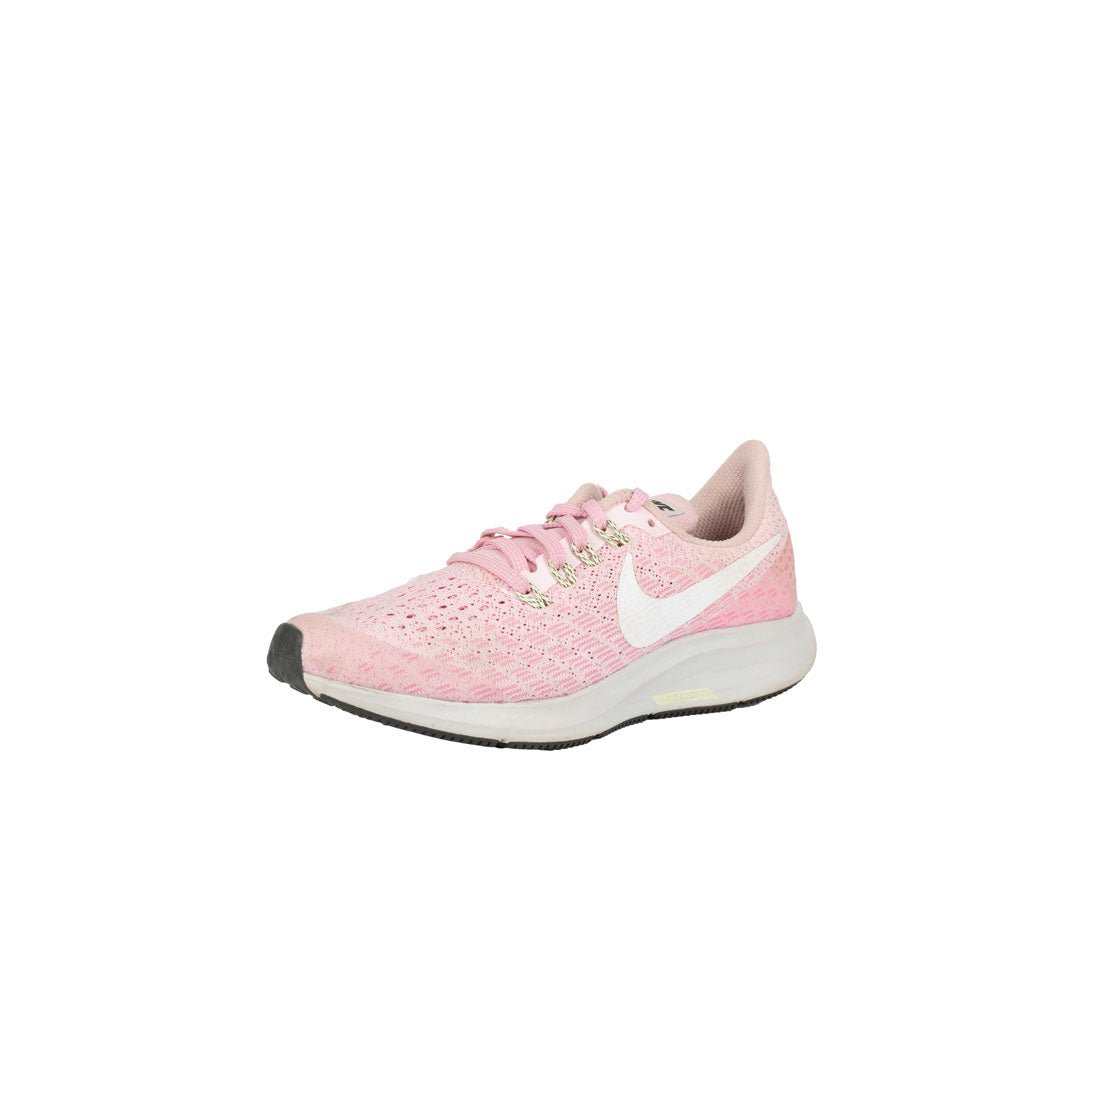 Nike Shoes For Girls - mymadstore.com